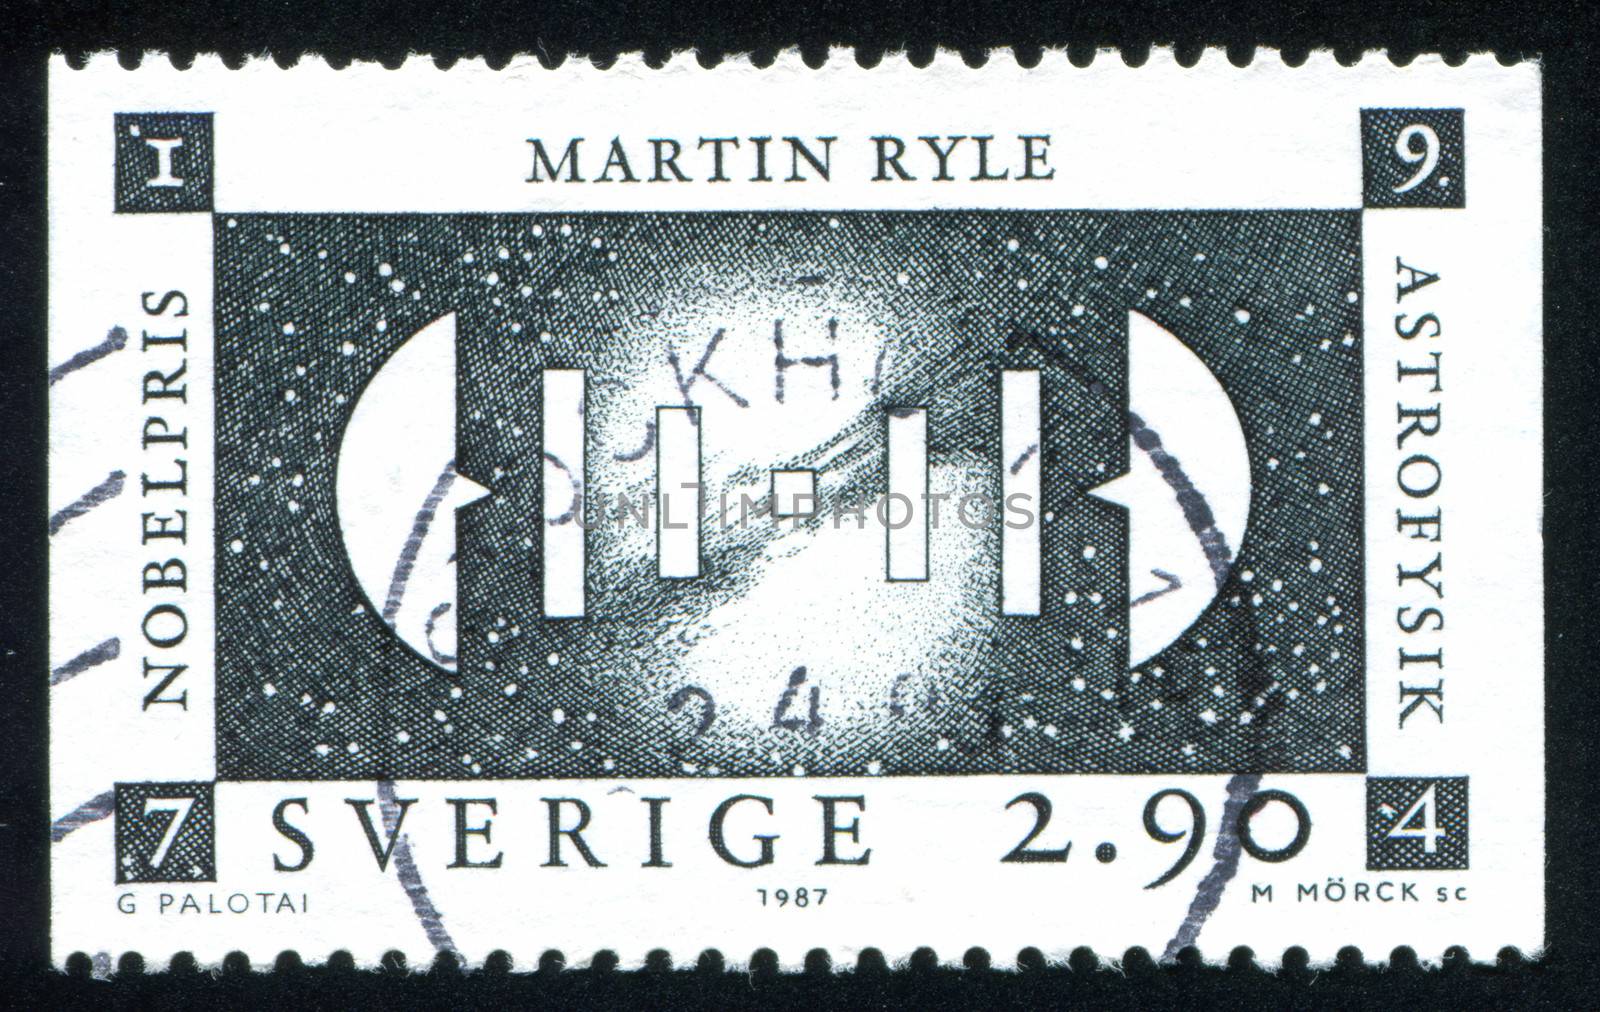 SWEDEN - CIRCA 1987: stamp printed by Sweden, shows Martin Ryle, Great Britain, circa 1987